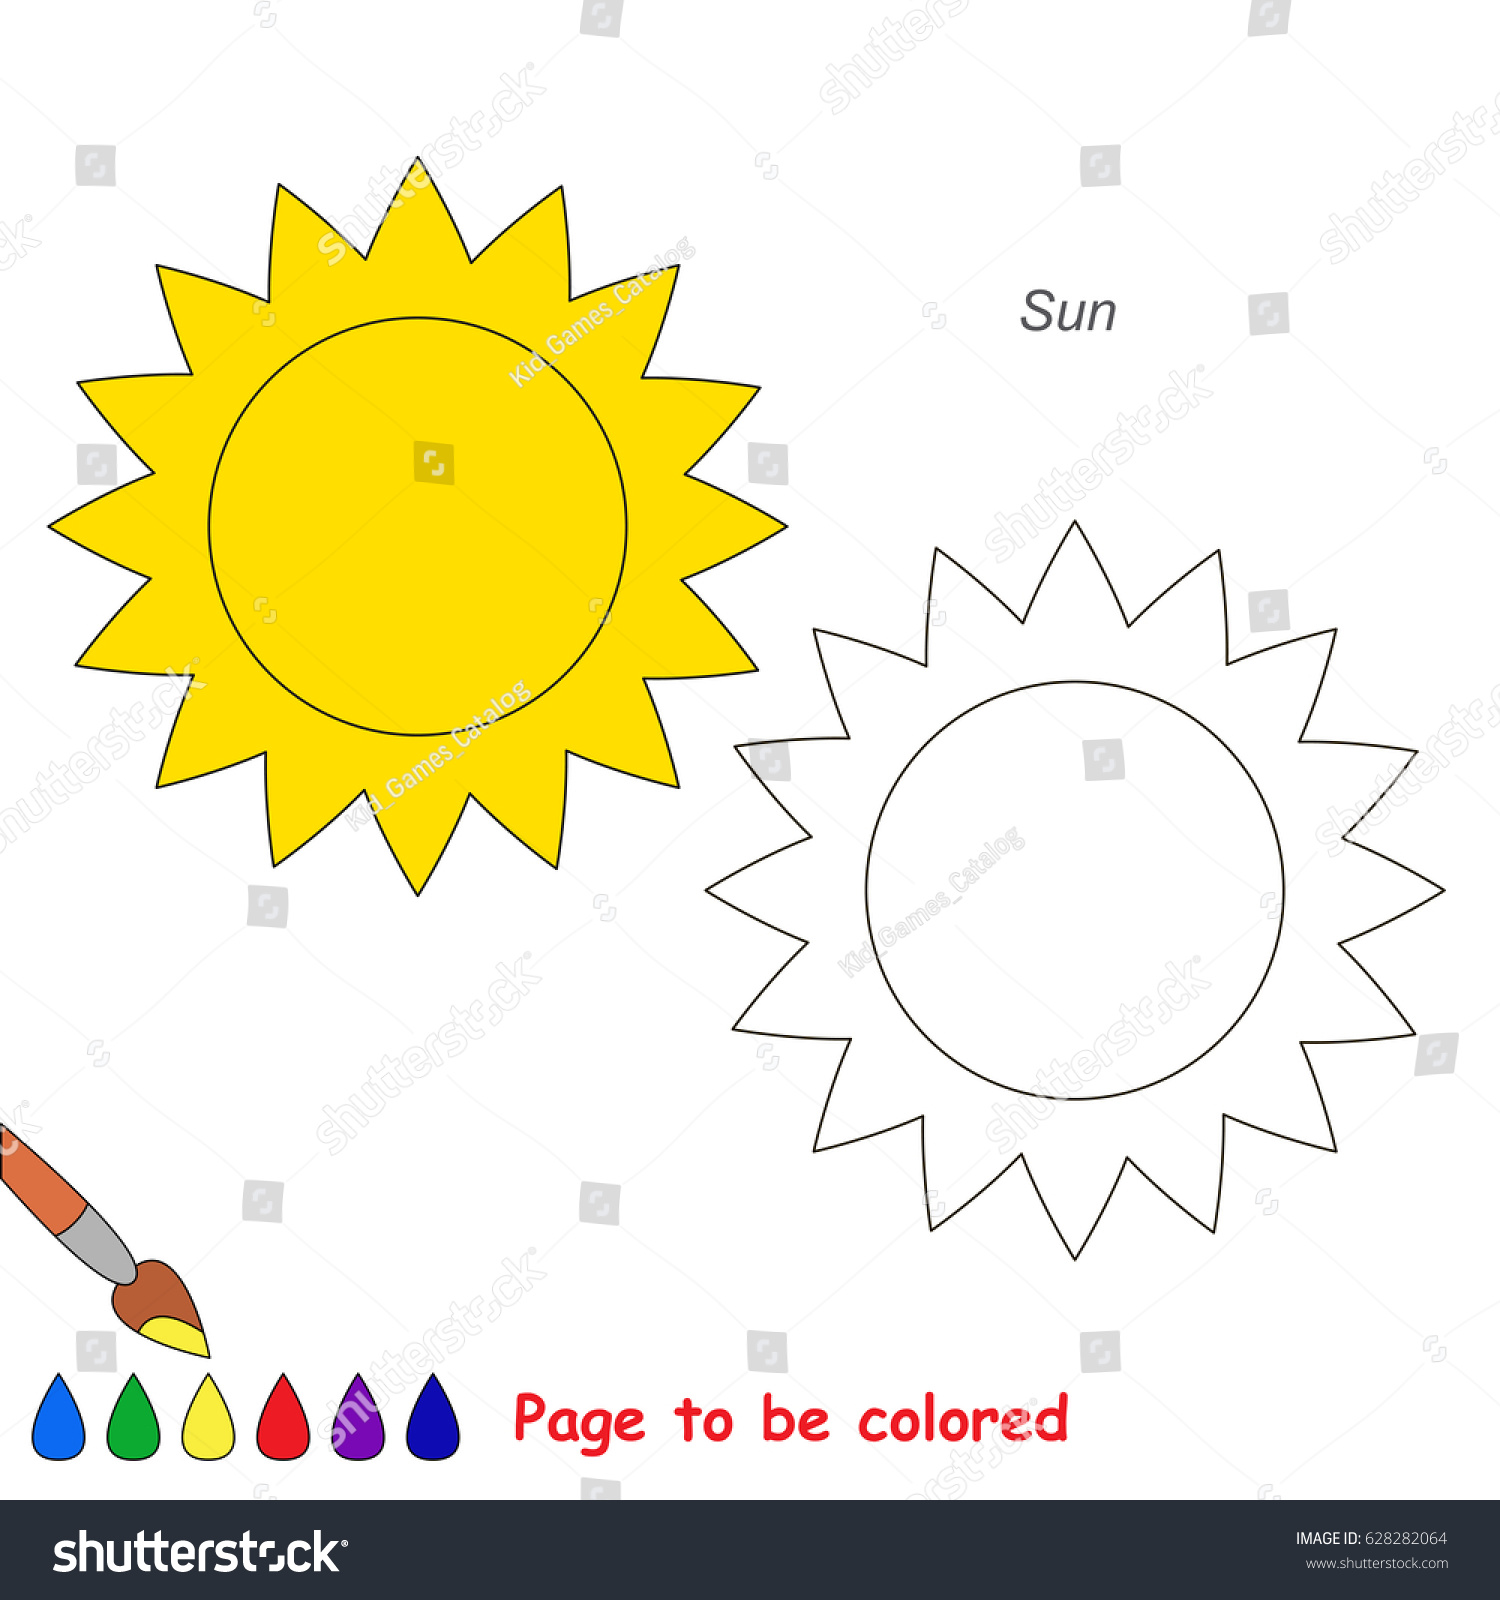 Sun star be colored coloring book stock vector royalty free